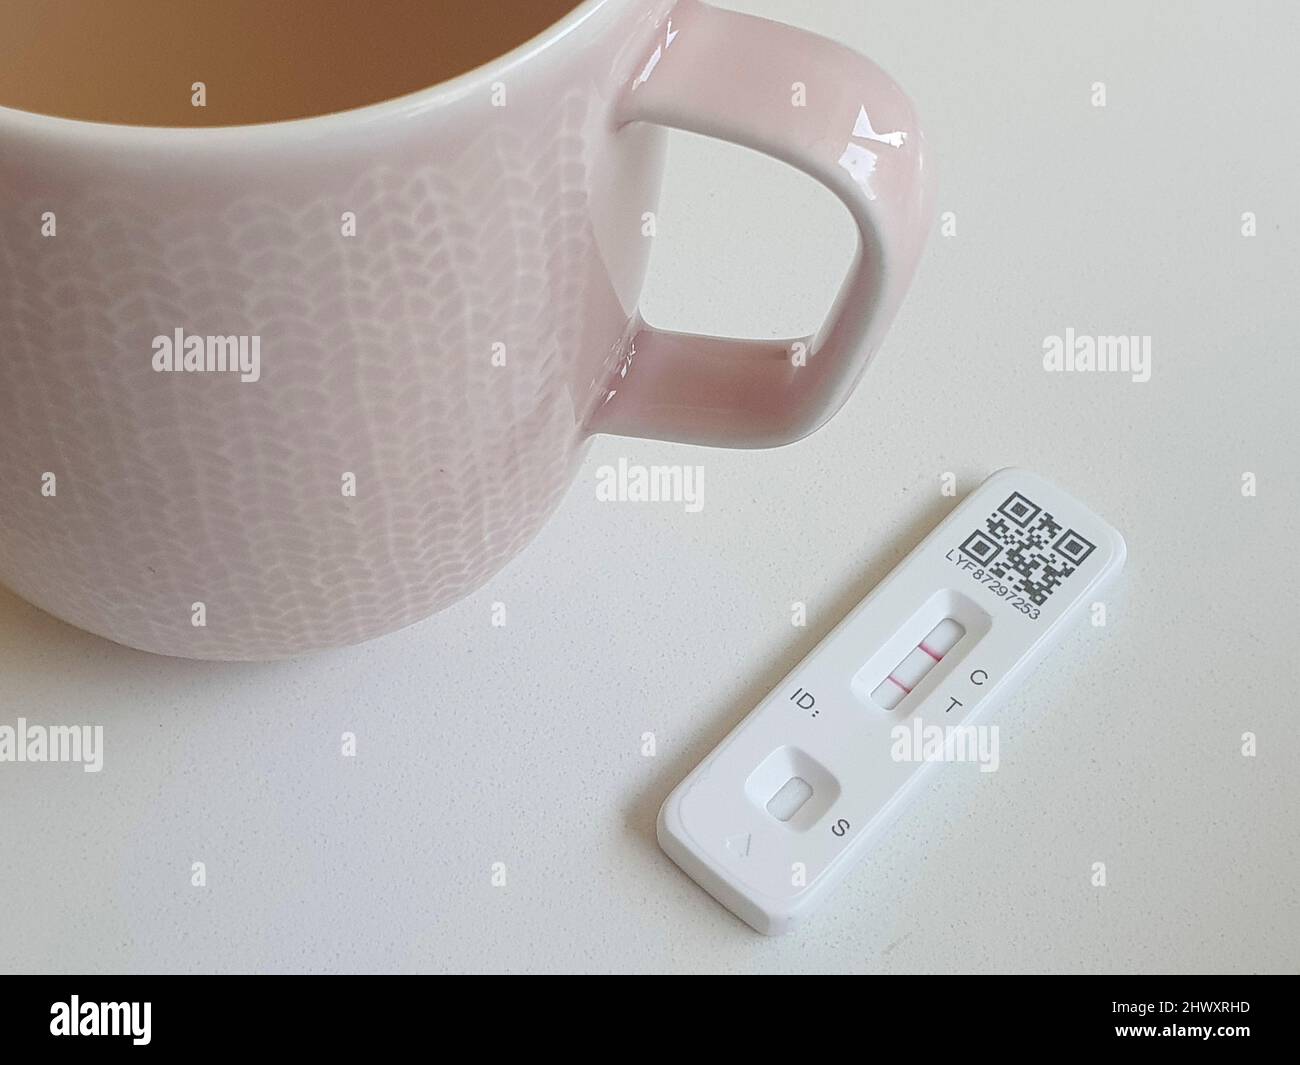 London, UK, 7 March 2022: A mug of Lemsip and a positive covid test. Since the government ended almost all coronavirus restrictions people who test positive with a rapid antigen test no longer need to get confirmation from a PCR test. While this saves money there is concern that new variants may not be identified. Anna Watson/Alamy Live News Stock Photo